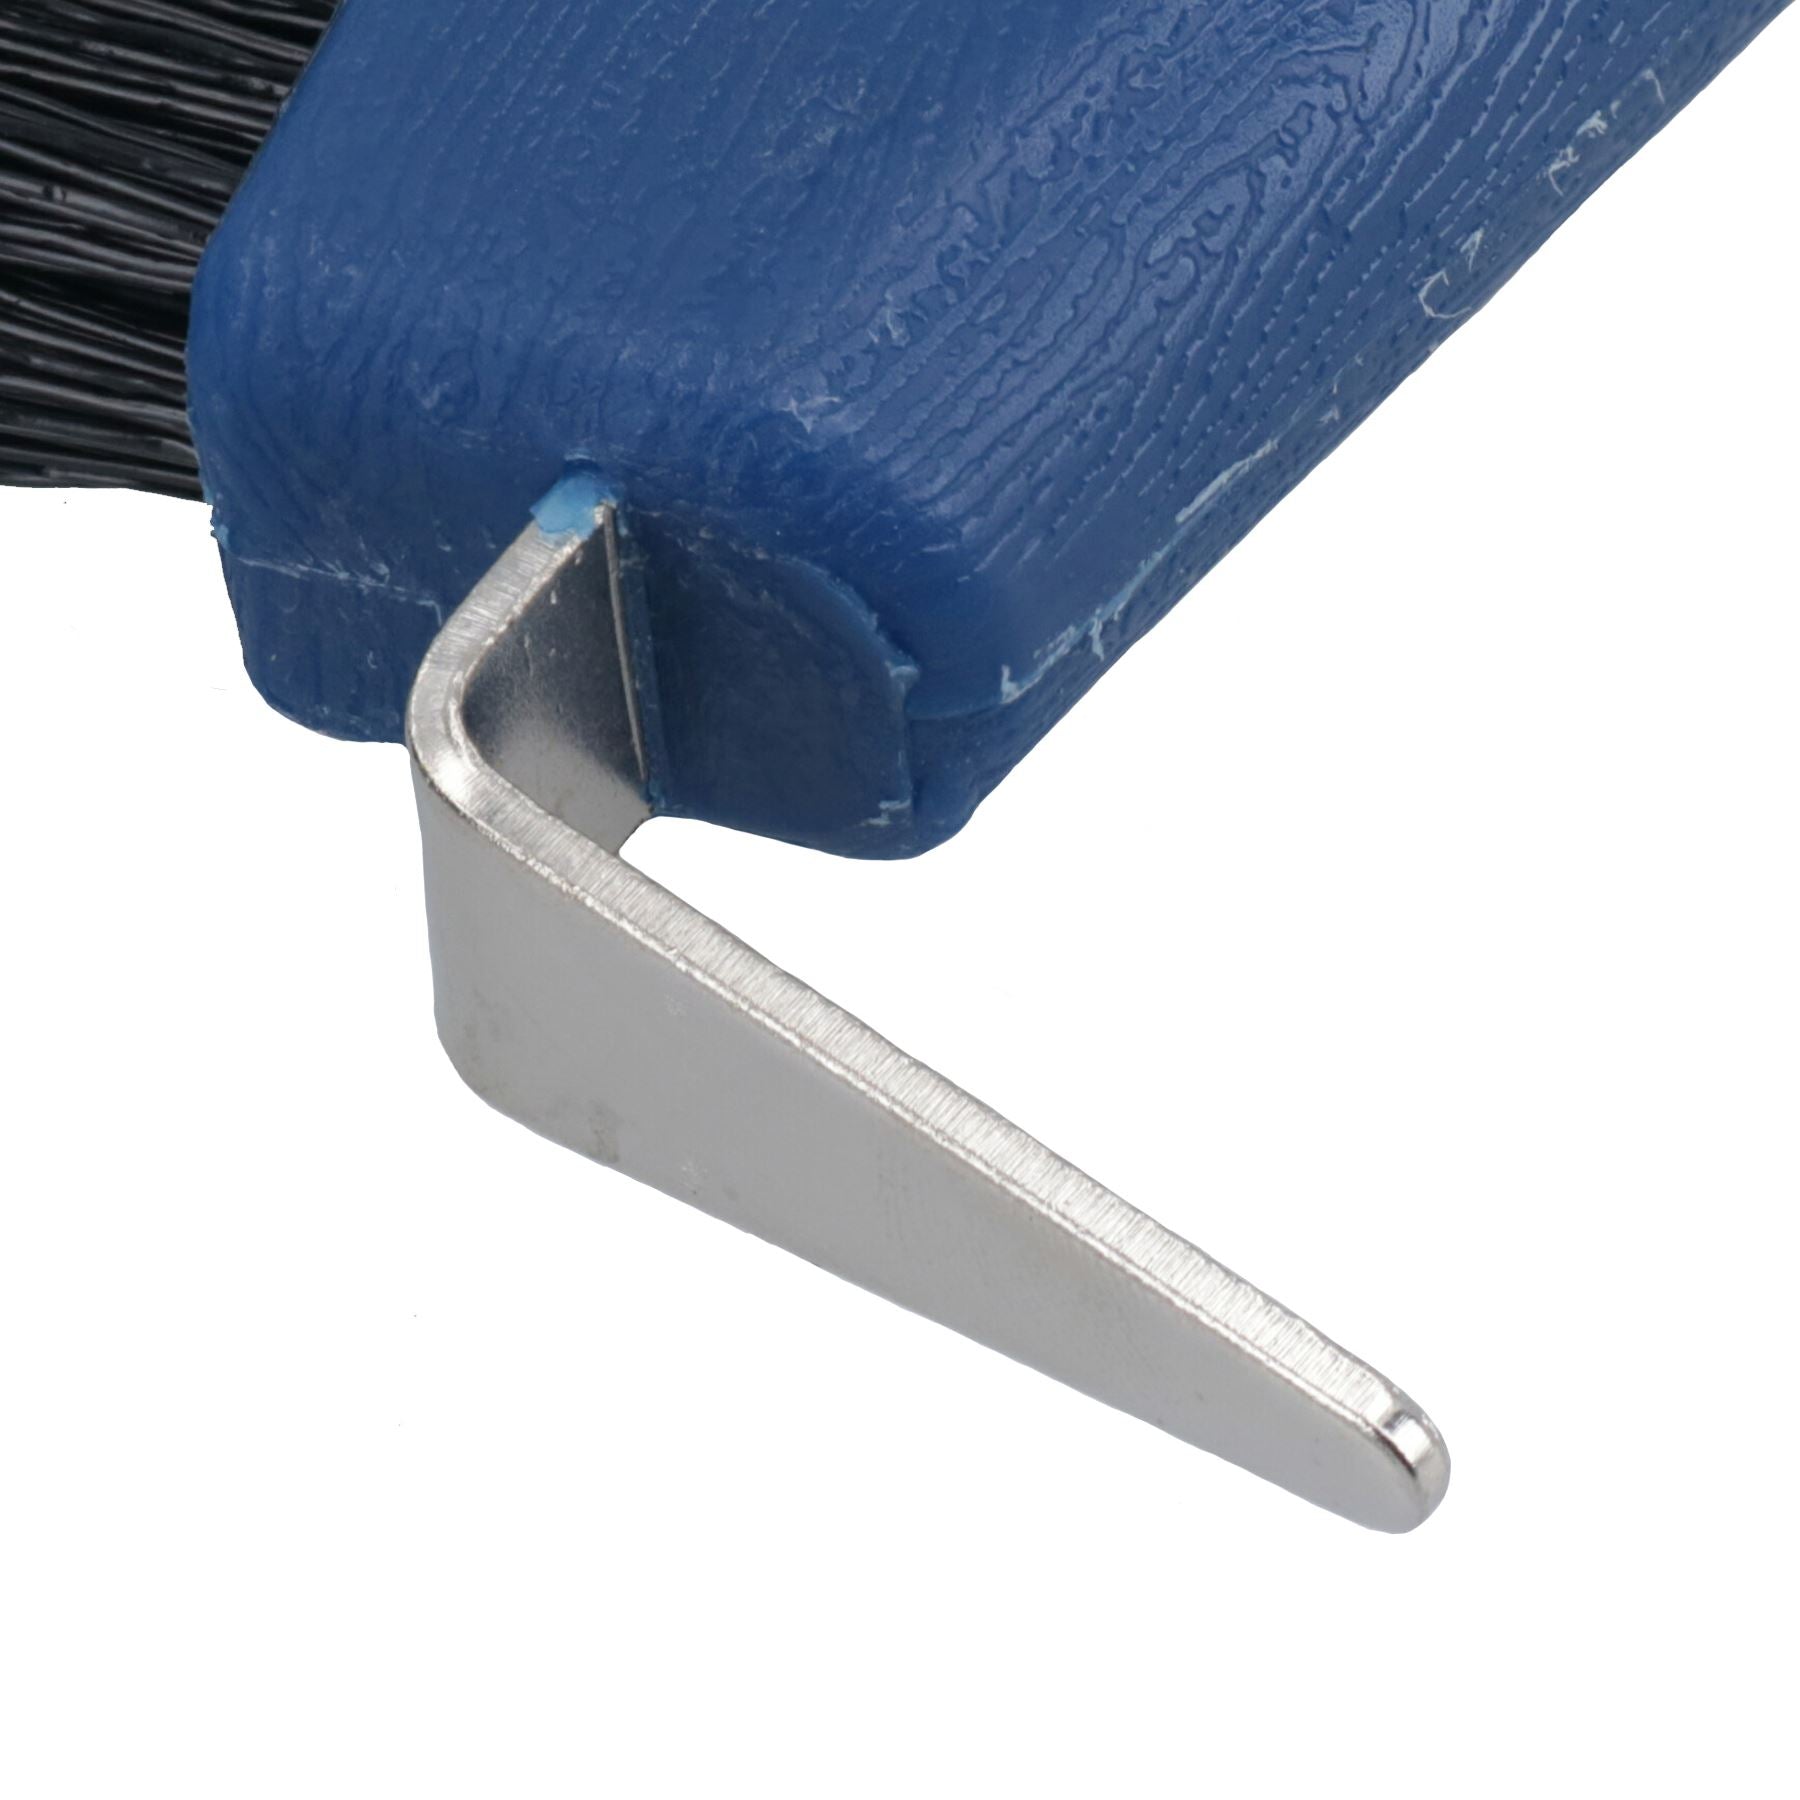 Durable Blue Horse Hoof Pick & Brush with Wave Grip Handle Stable Accessory